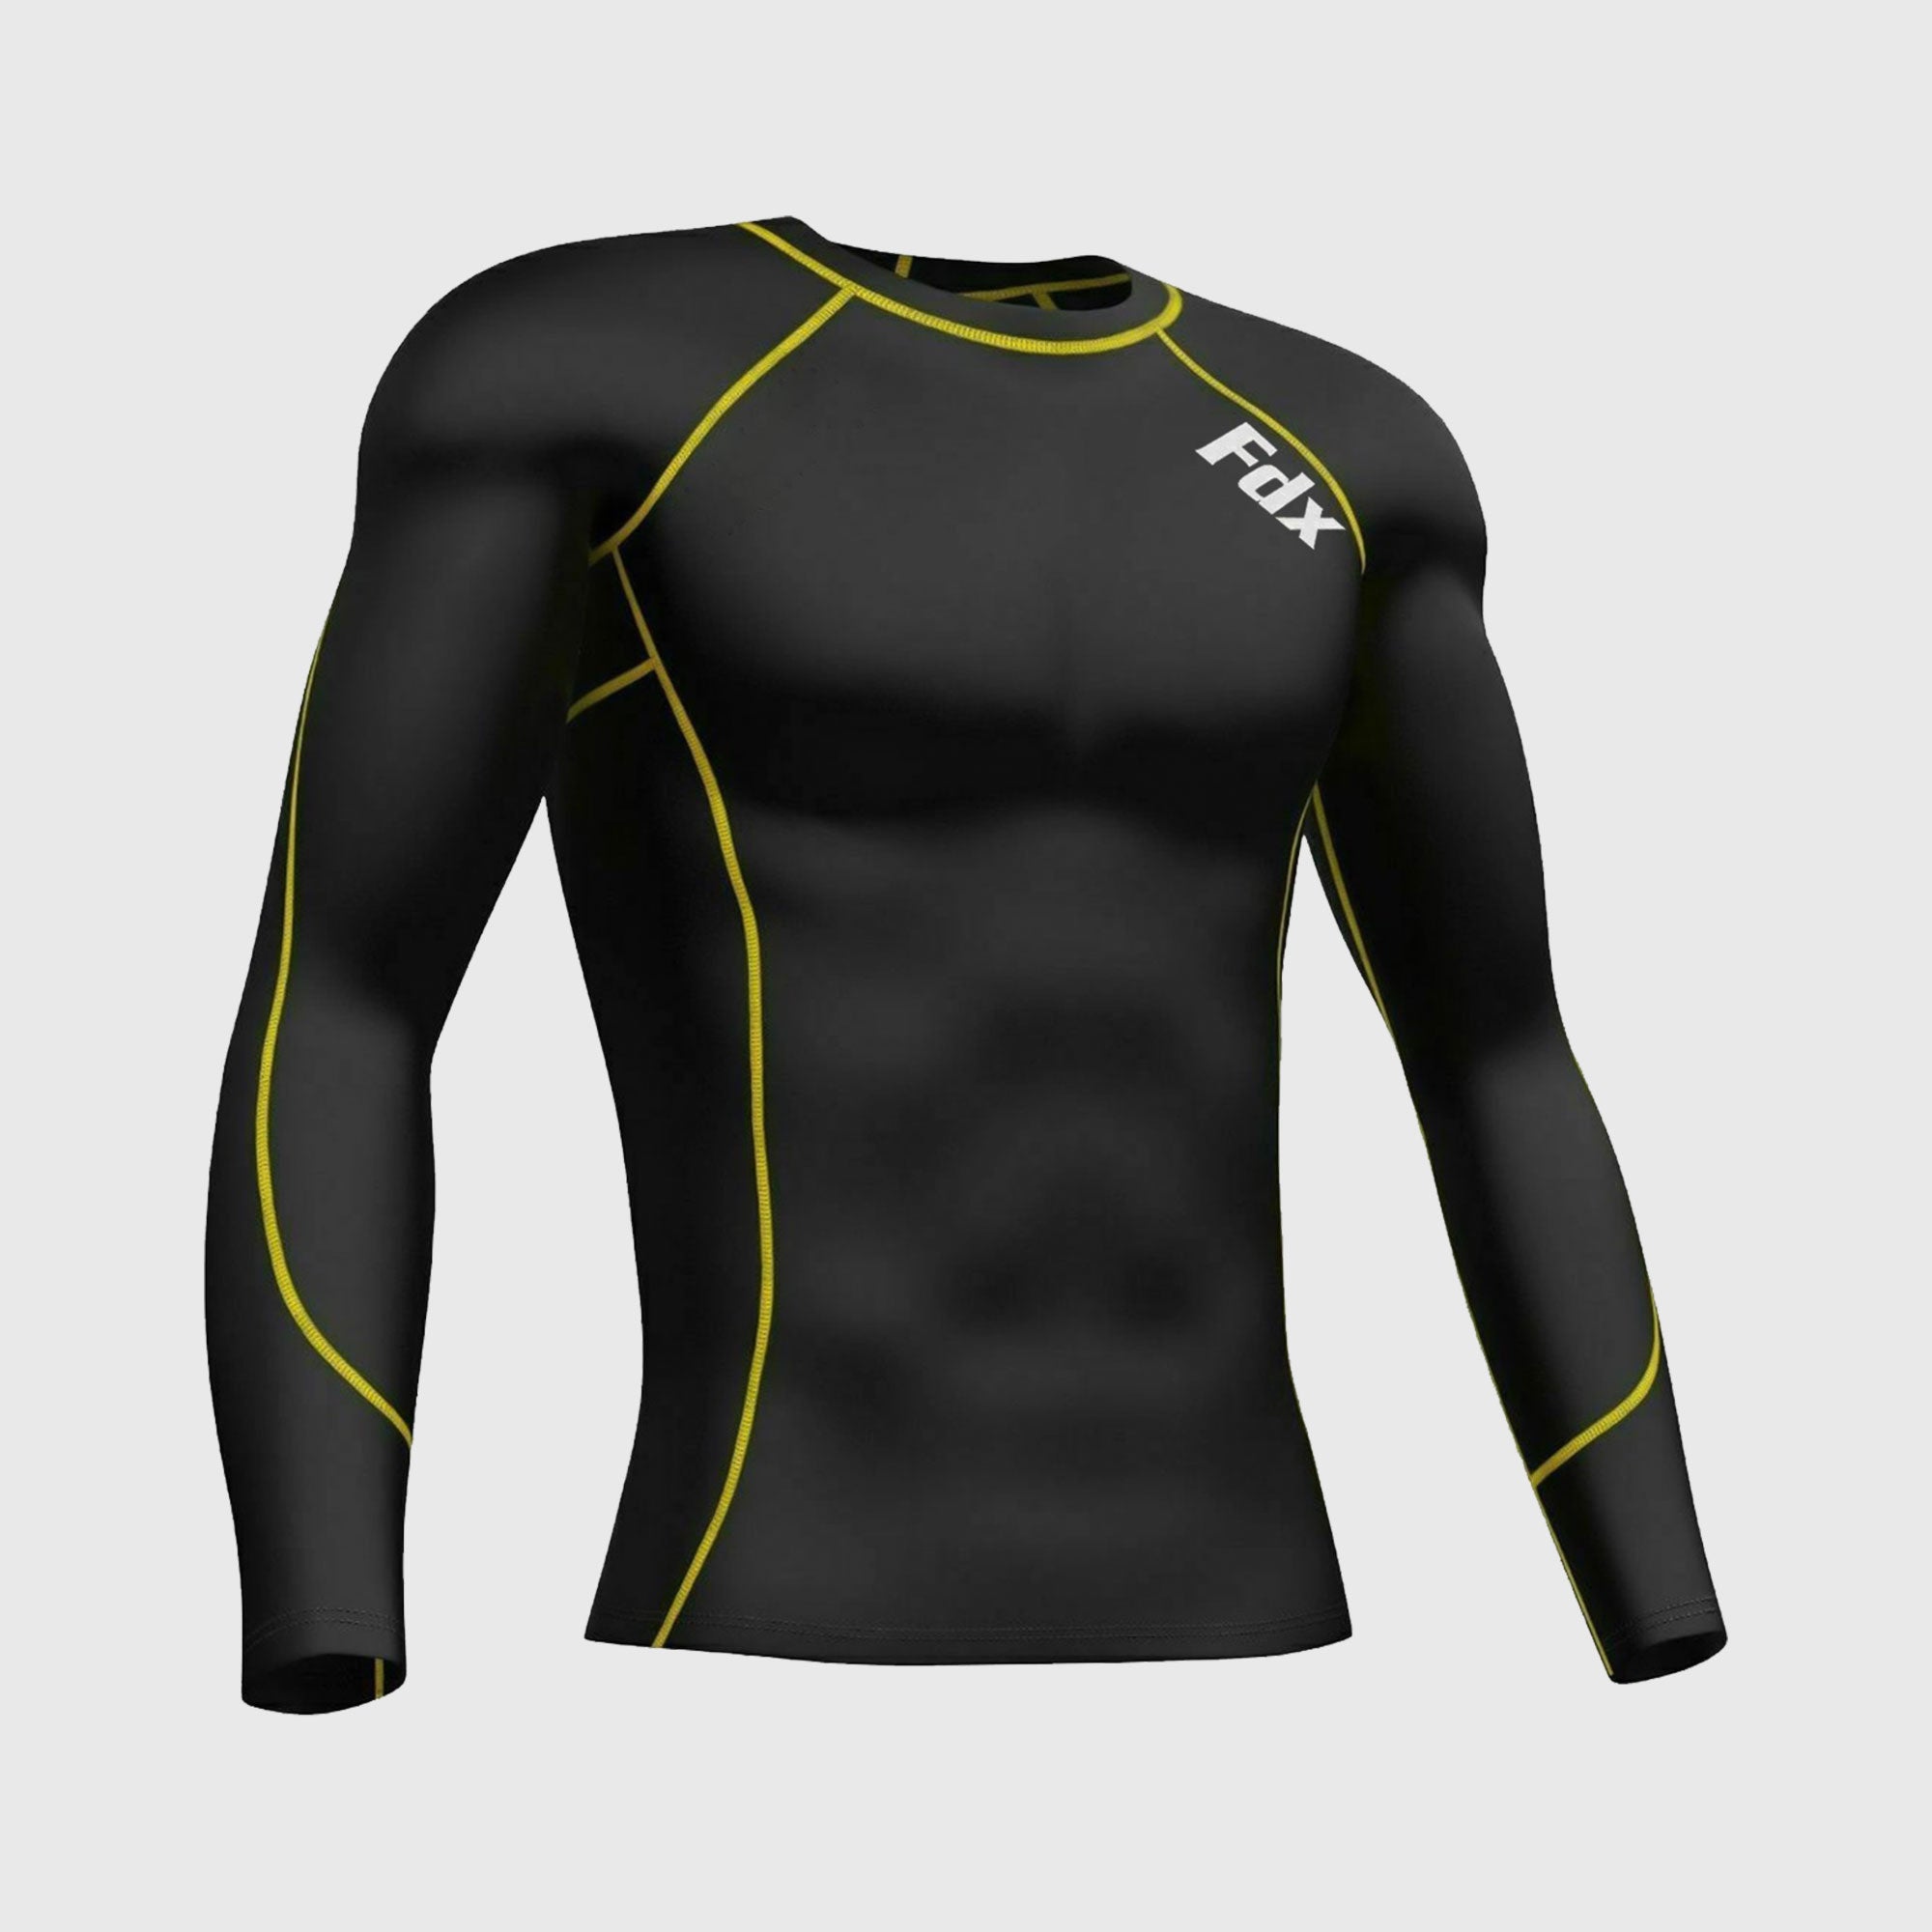 Fdx Mens Black & Yellow Long Sleeve Compression Top Running Gym Workout Wear Rash Guard Stretchable Breathable - Blitz